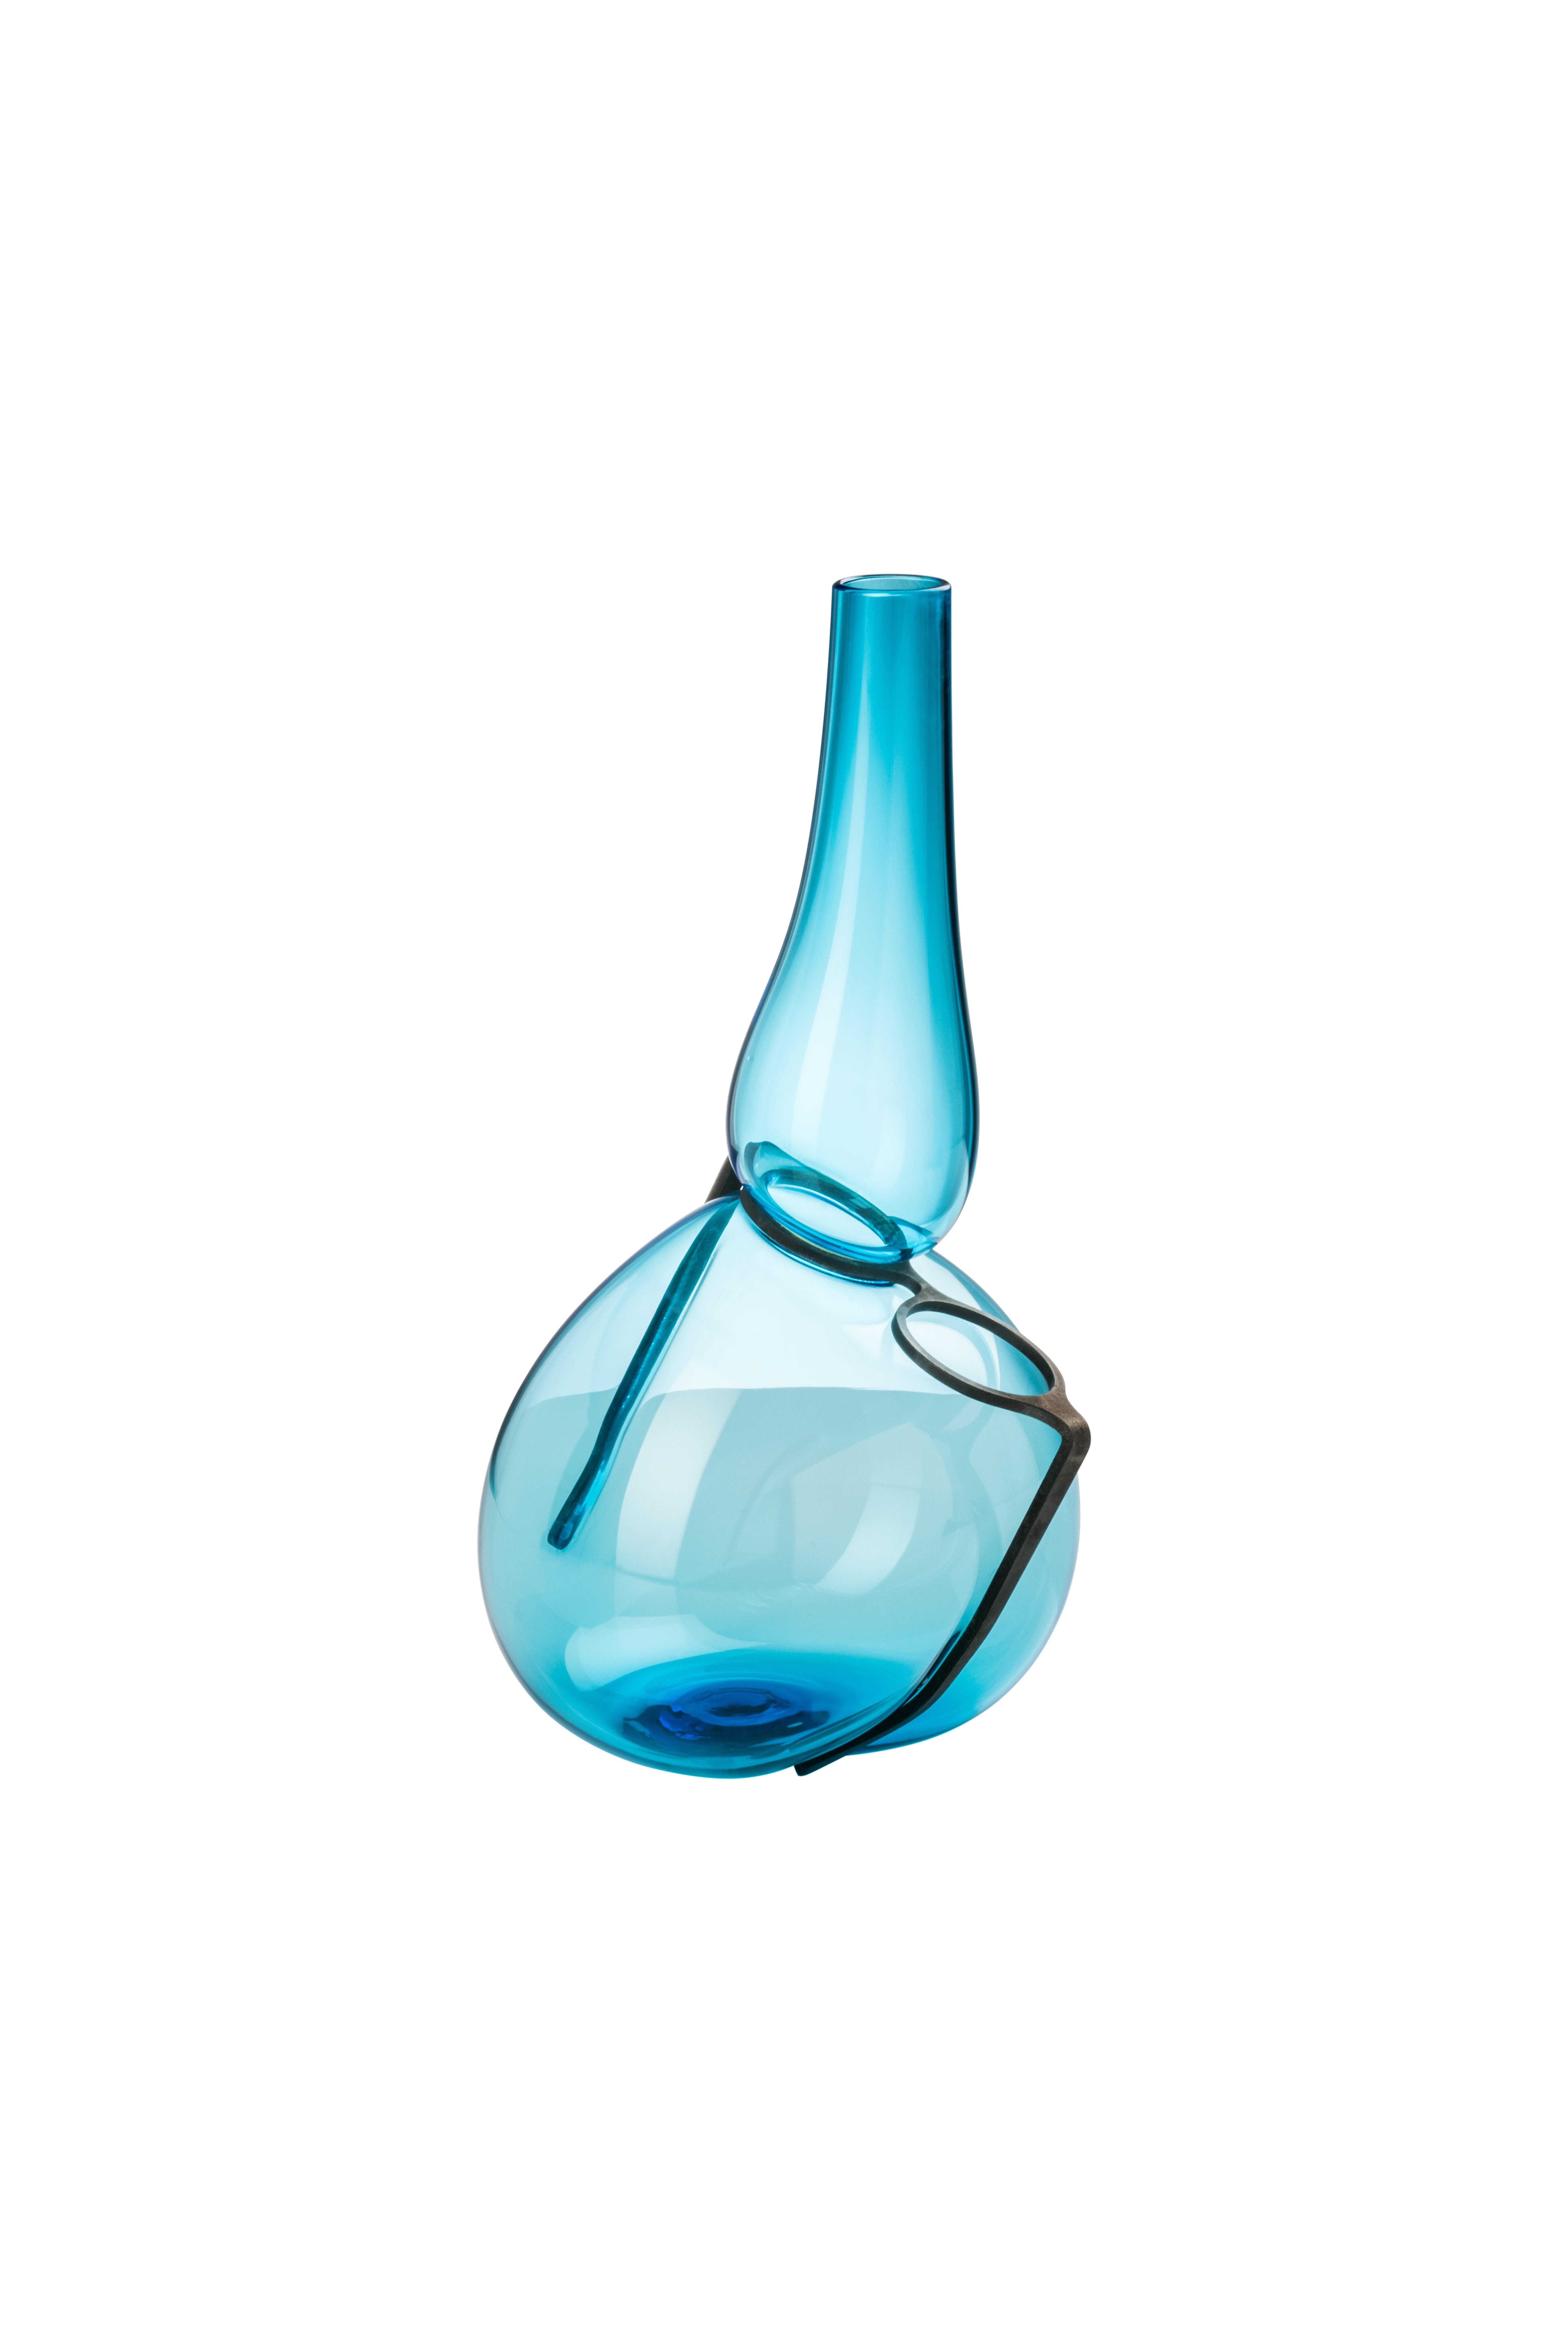 Venini glass vase with slim shaped neck and black glass glasses sculpture. Featured in aquamarine colored glass. Perfect for indoor home decor as container or strong statement piece for any room.

Dimensions: 25 cm diameter x cm height.